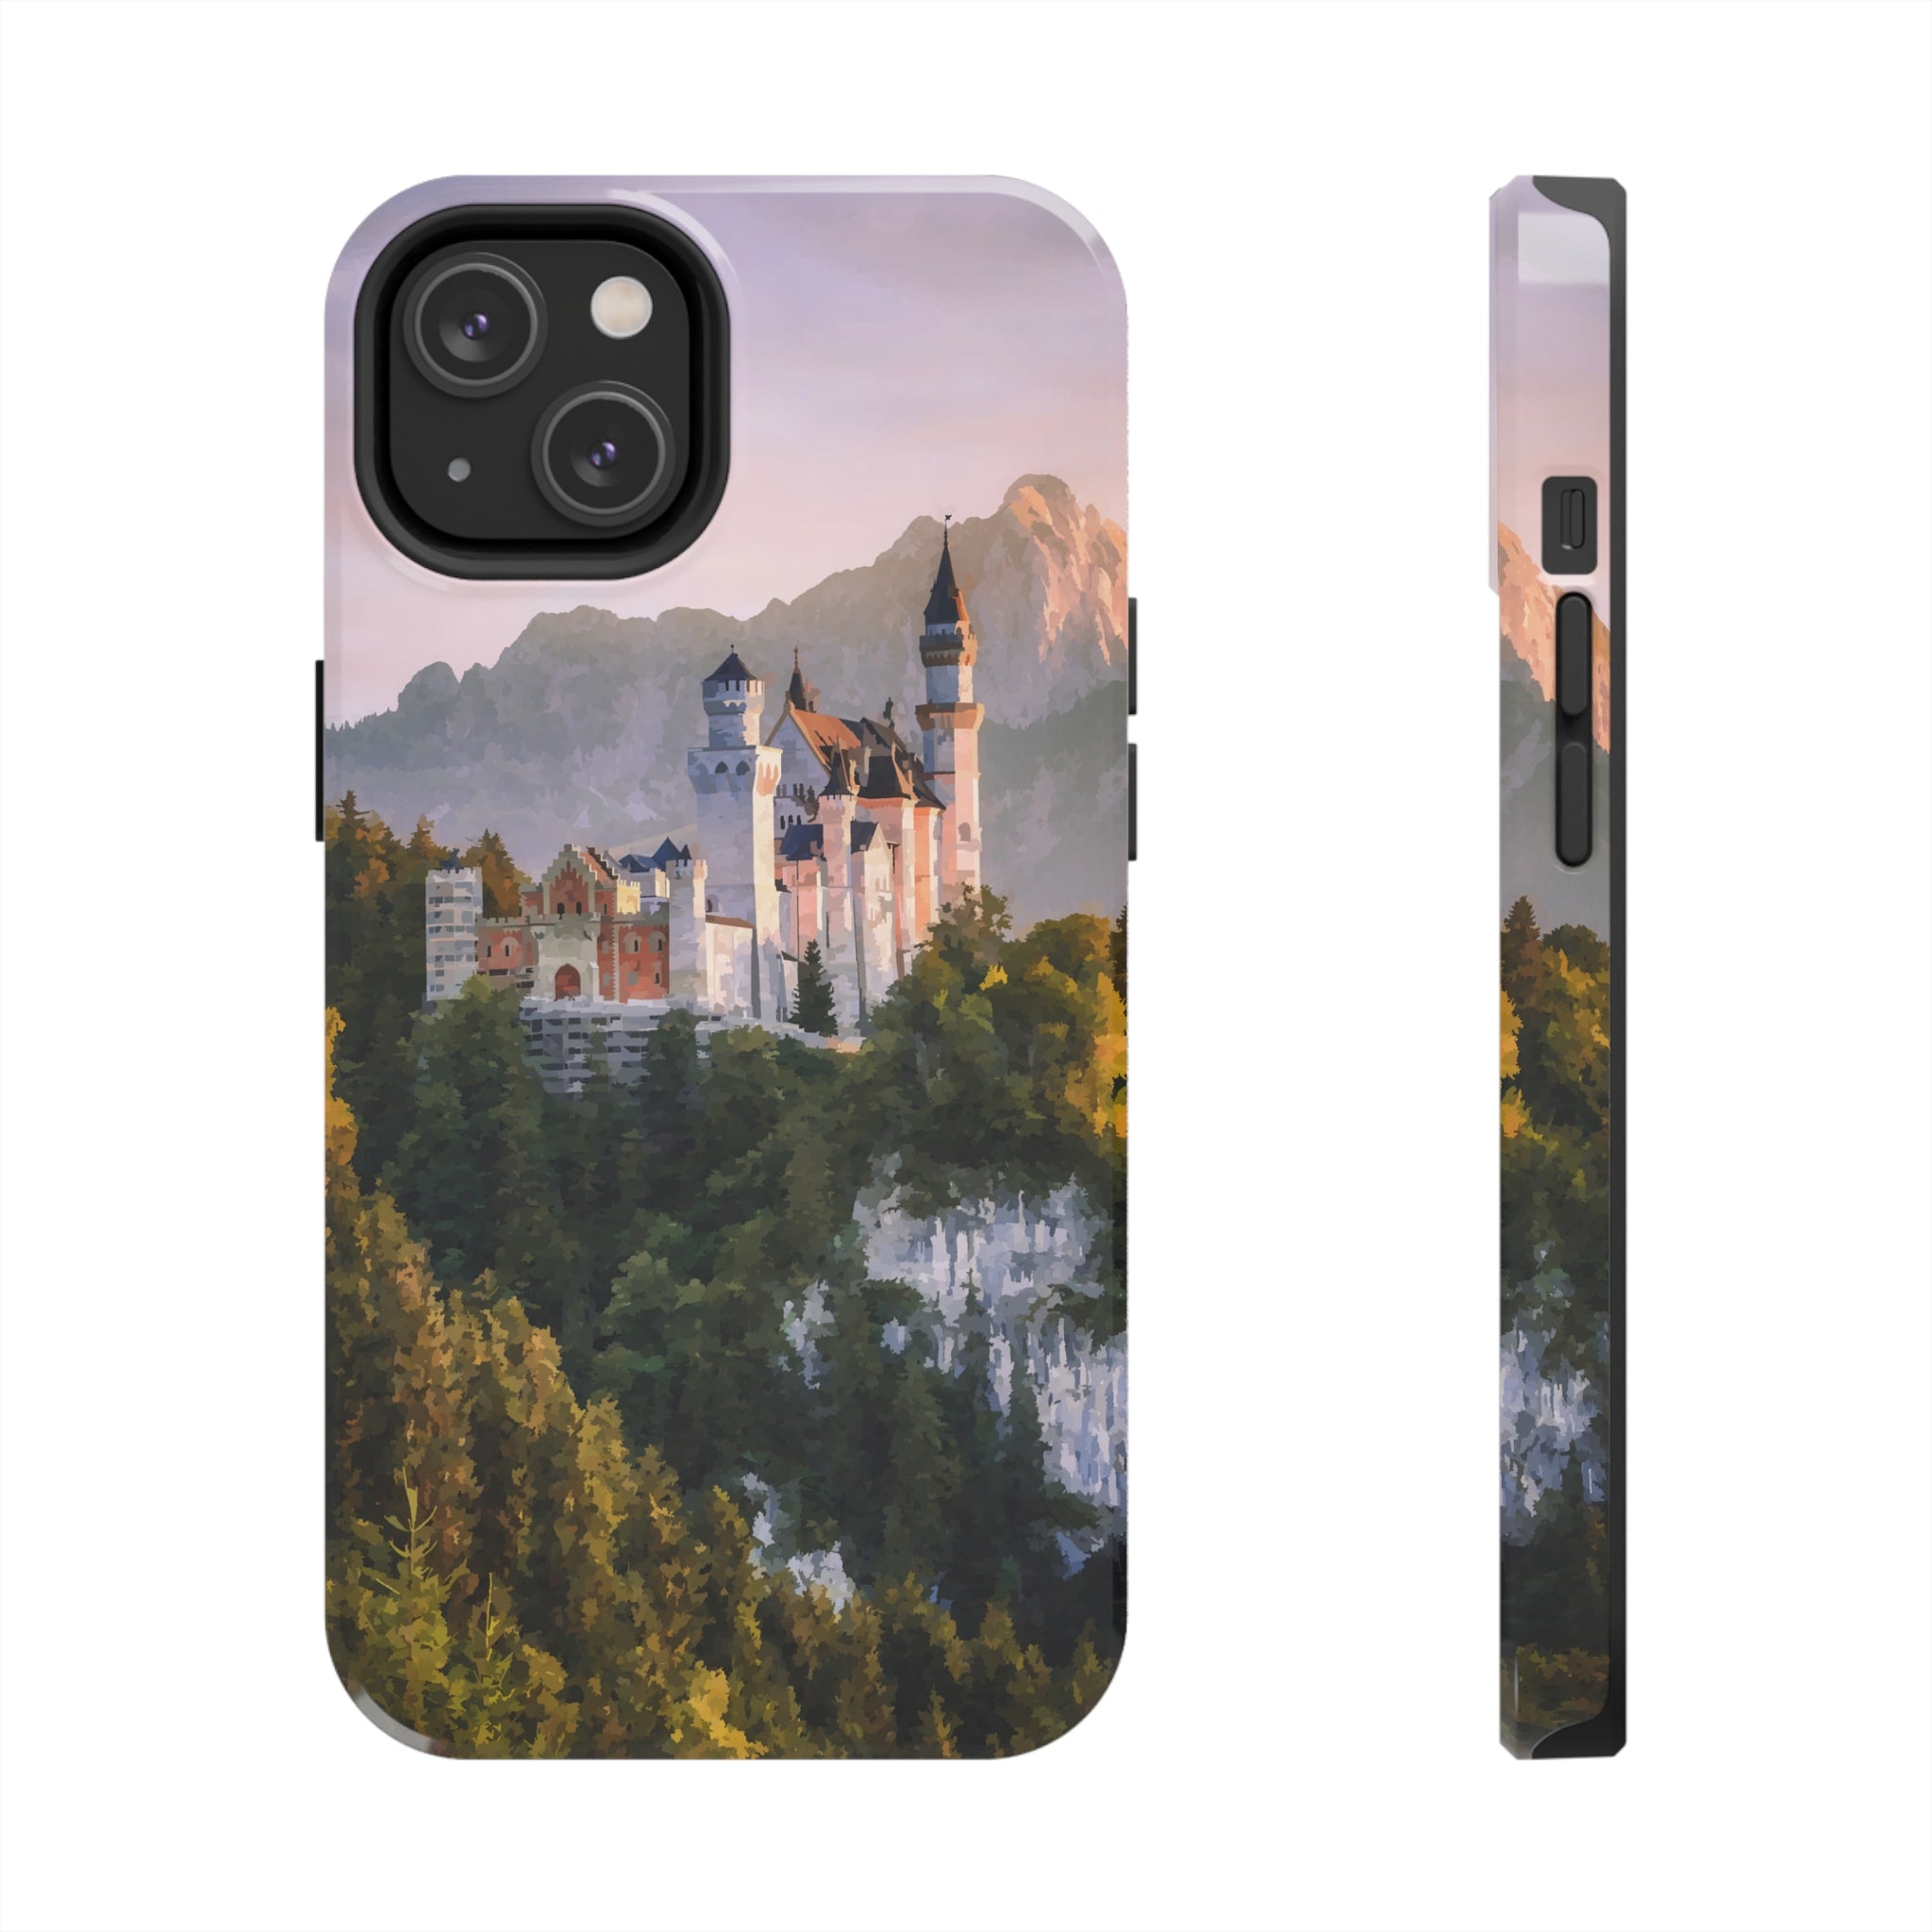 Main image of Castle on Mountain iPhone Case